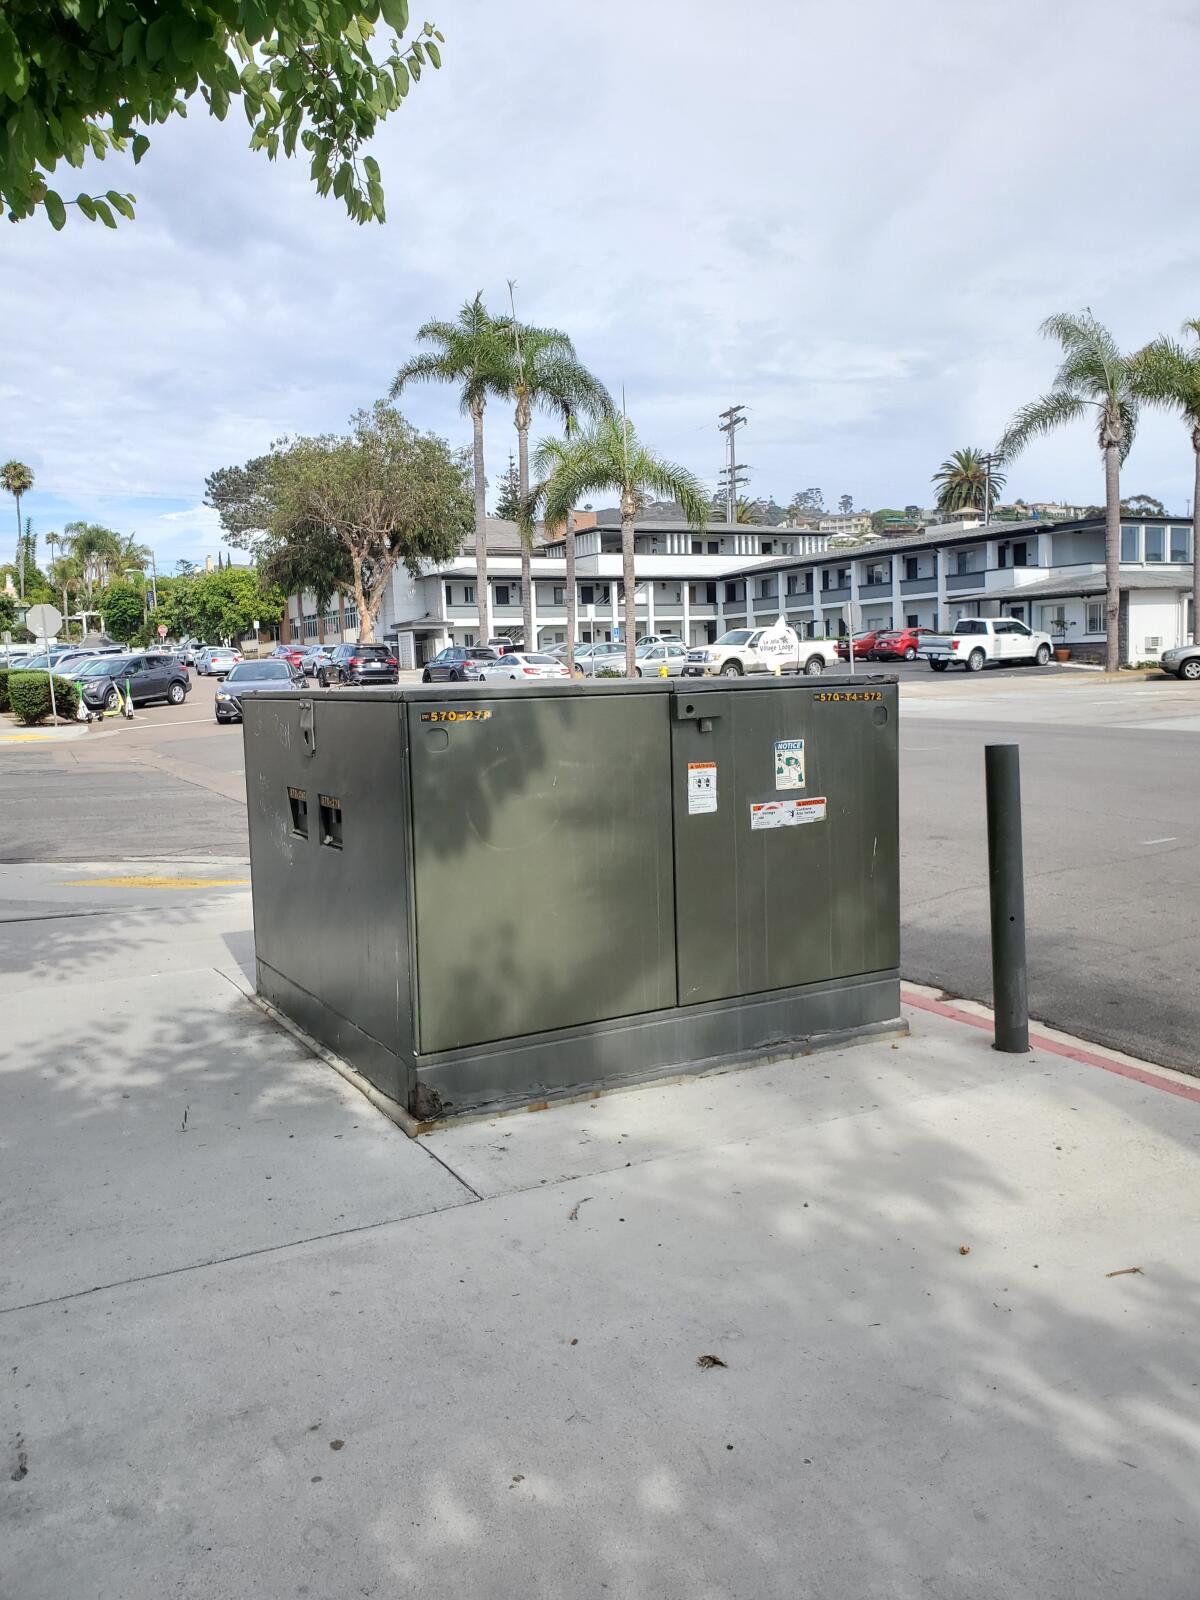 This utility box on the corner of Herschel Avenue and Silverado Street in La Jolla is planned for a wayfinding wrap.